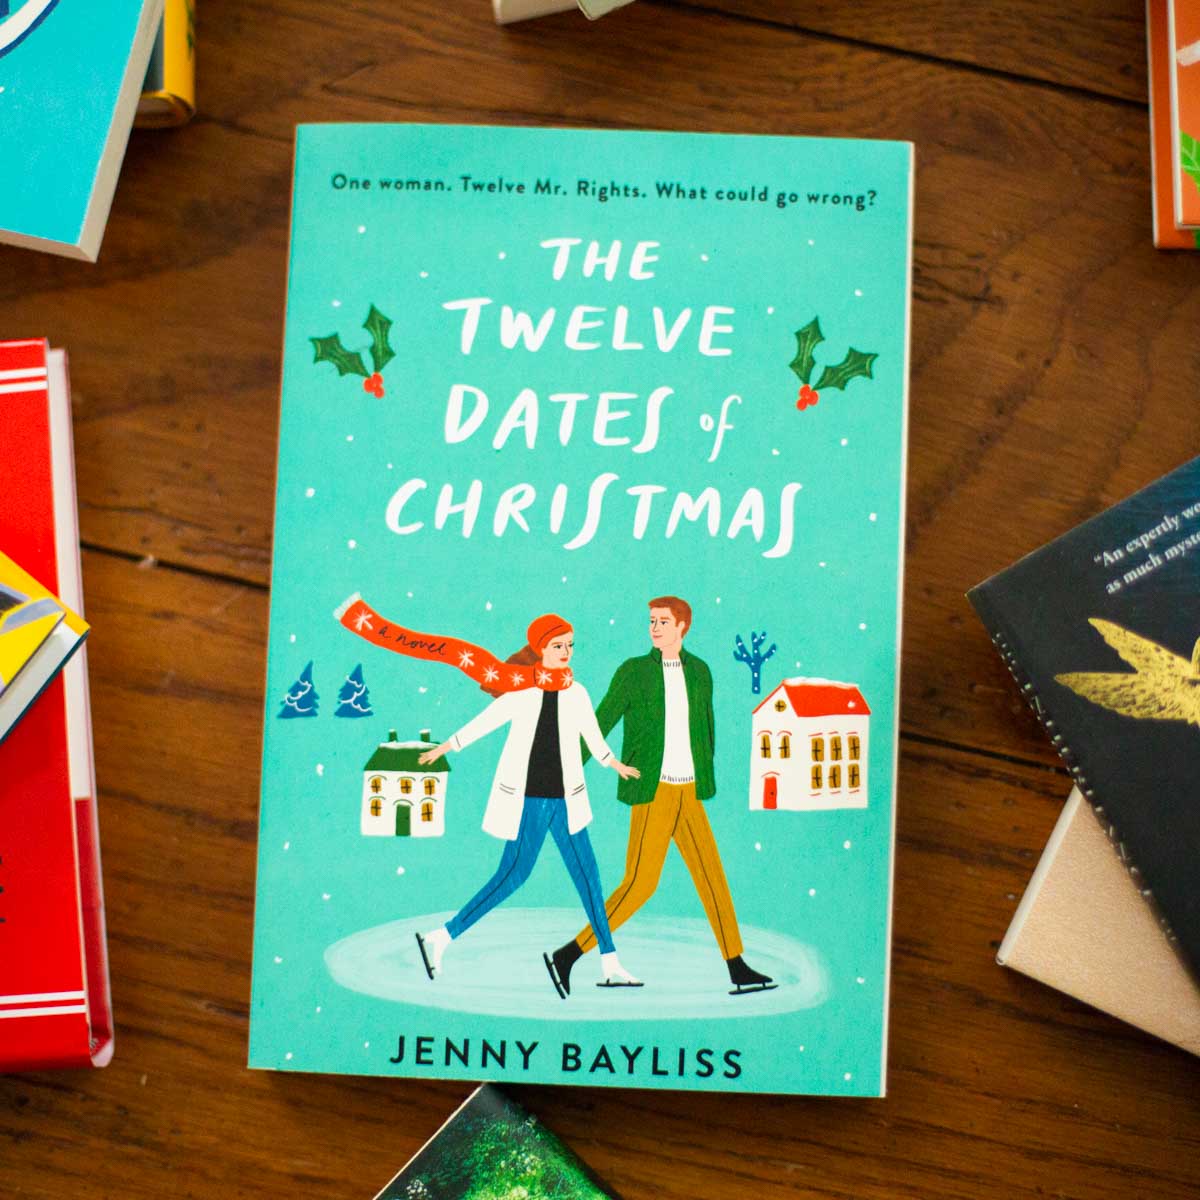 A copy of the book The Twelve Dates of Christmas is on the table.